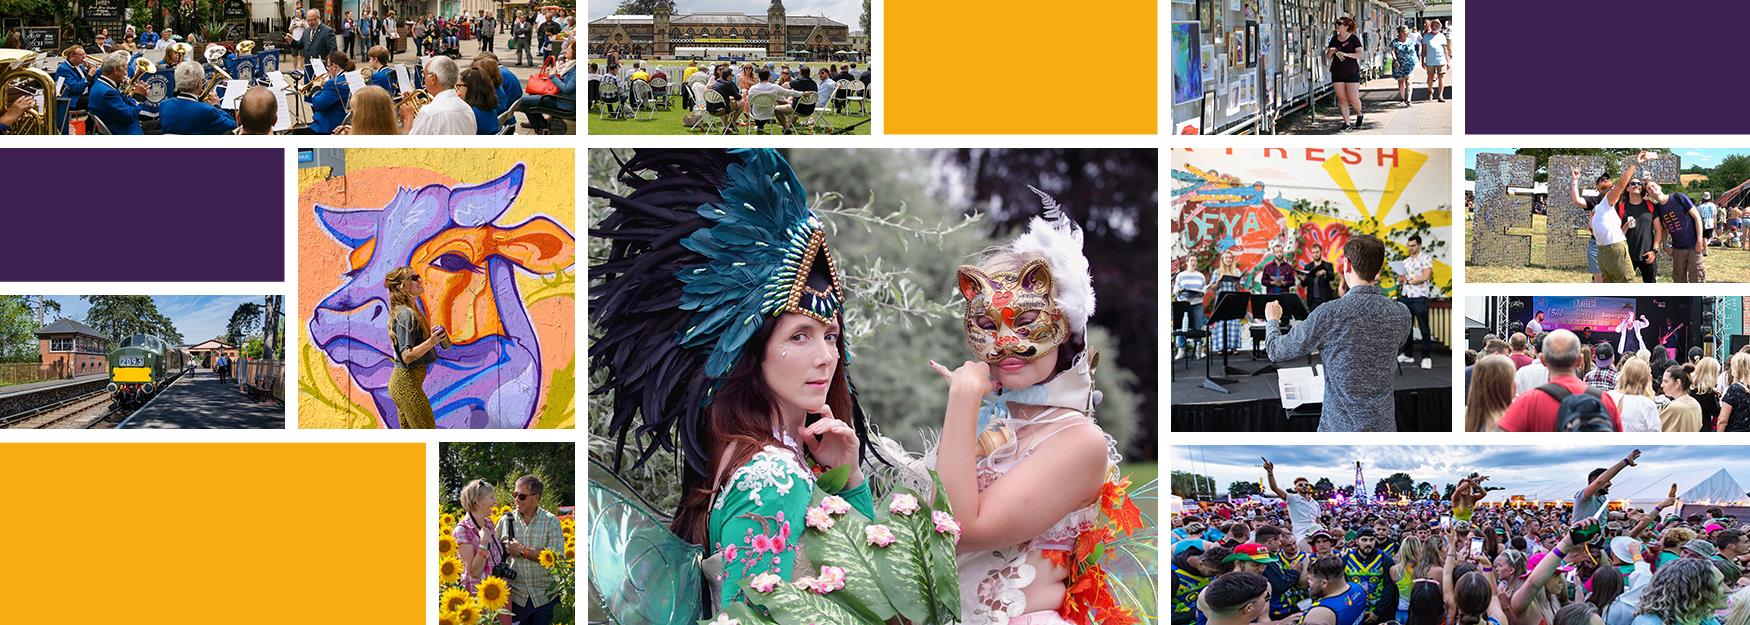 A collage of images showcasing July events in Cheltenham